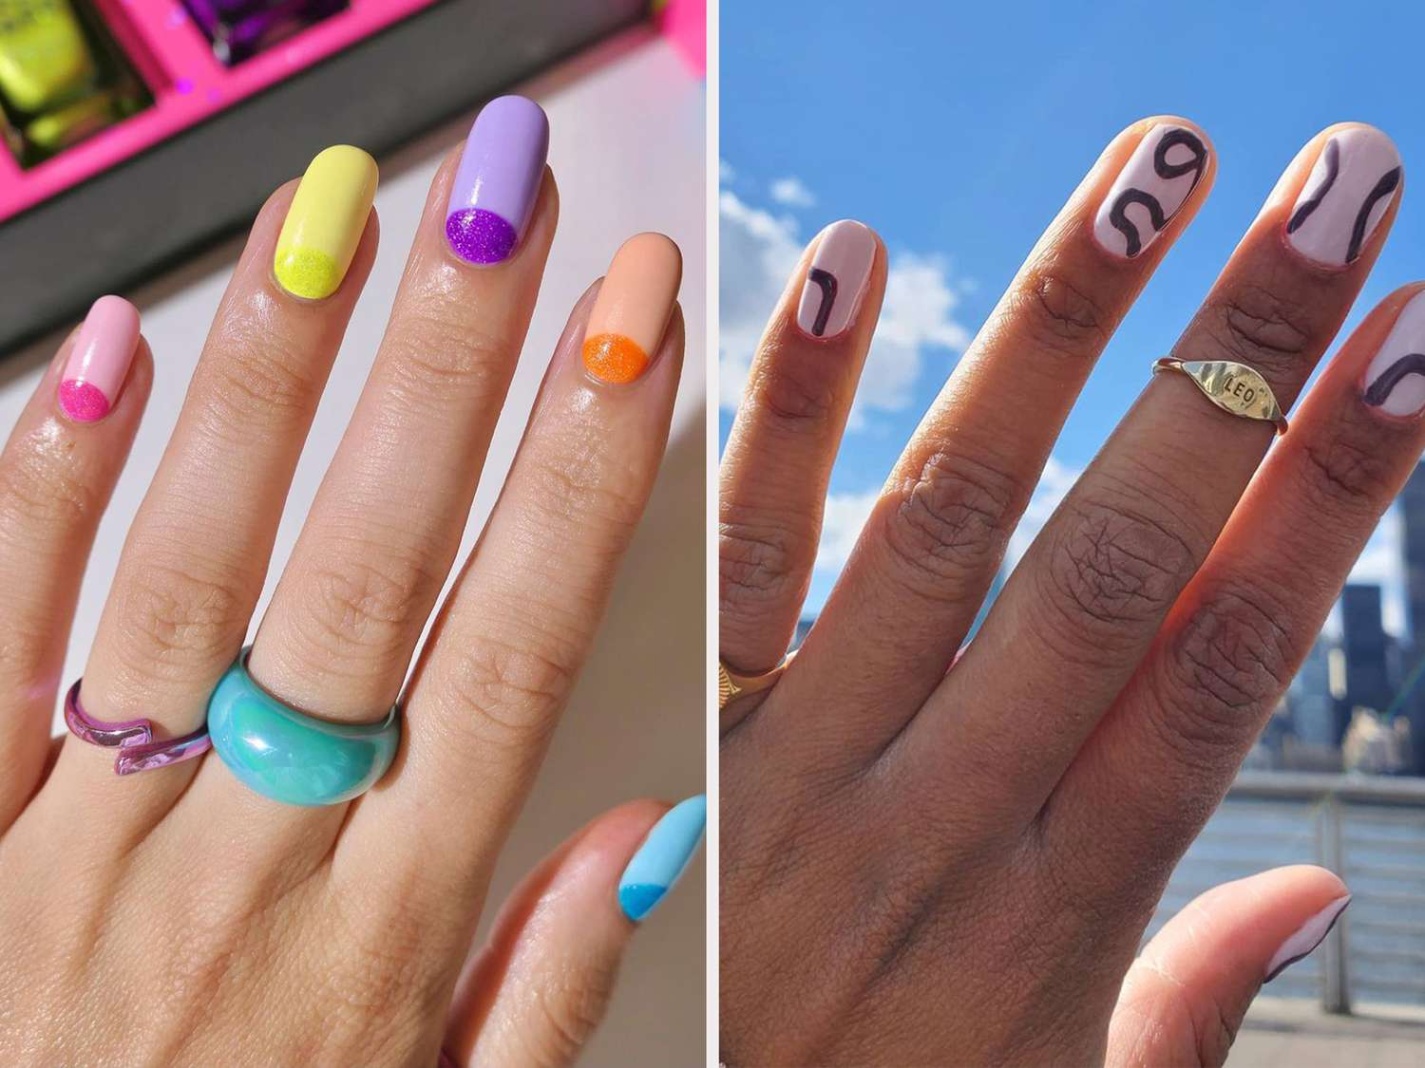 10 Trendy Nail Polish Designs To Elevate Your Look!